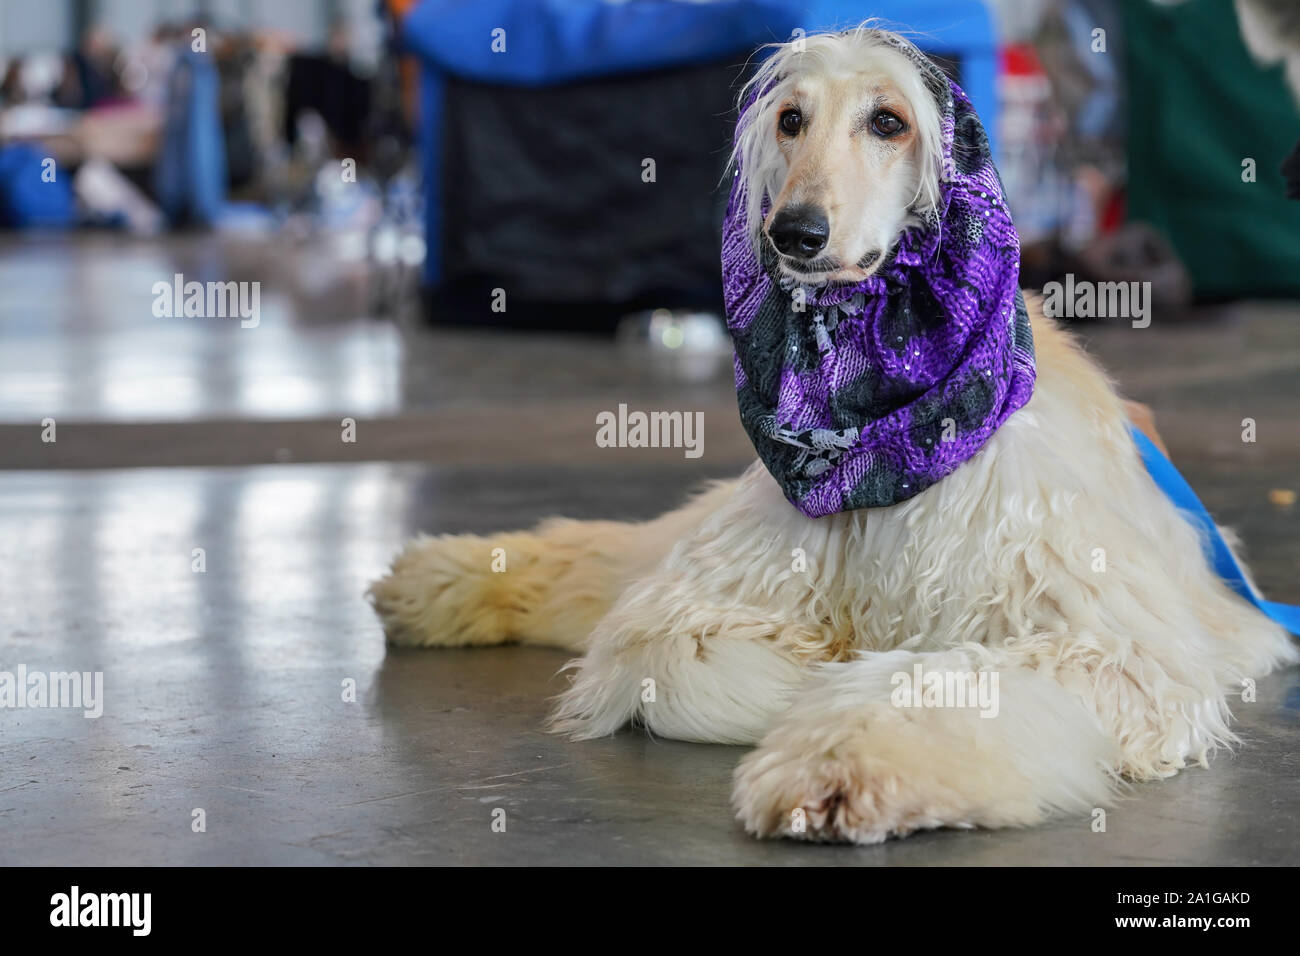 White Borzoi laying on the stone floor indoors, Purple scarf around neck, groomed and ready, waiting at the dog competition Stock Photo